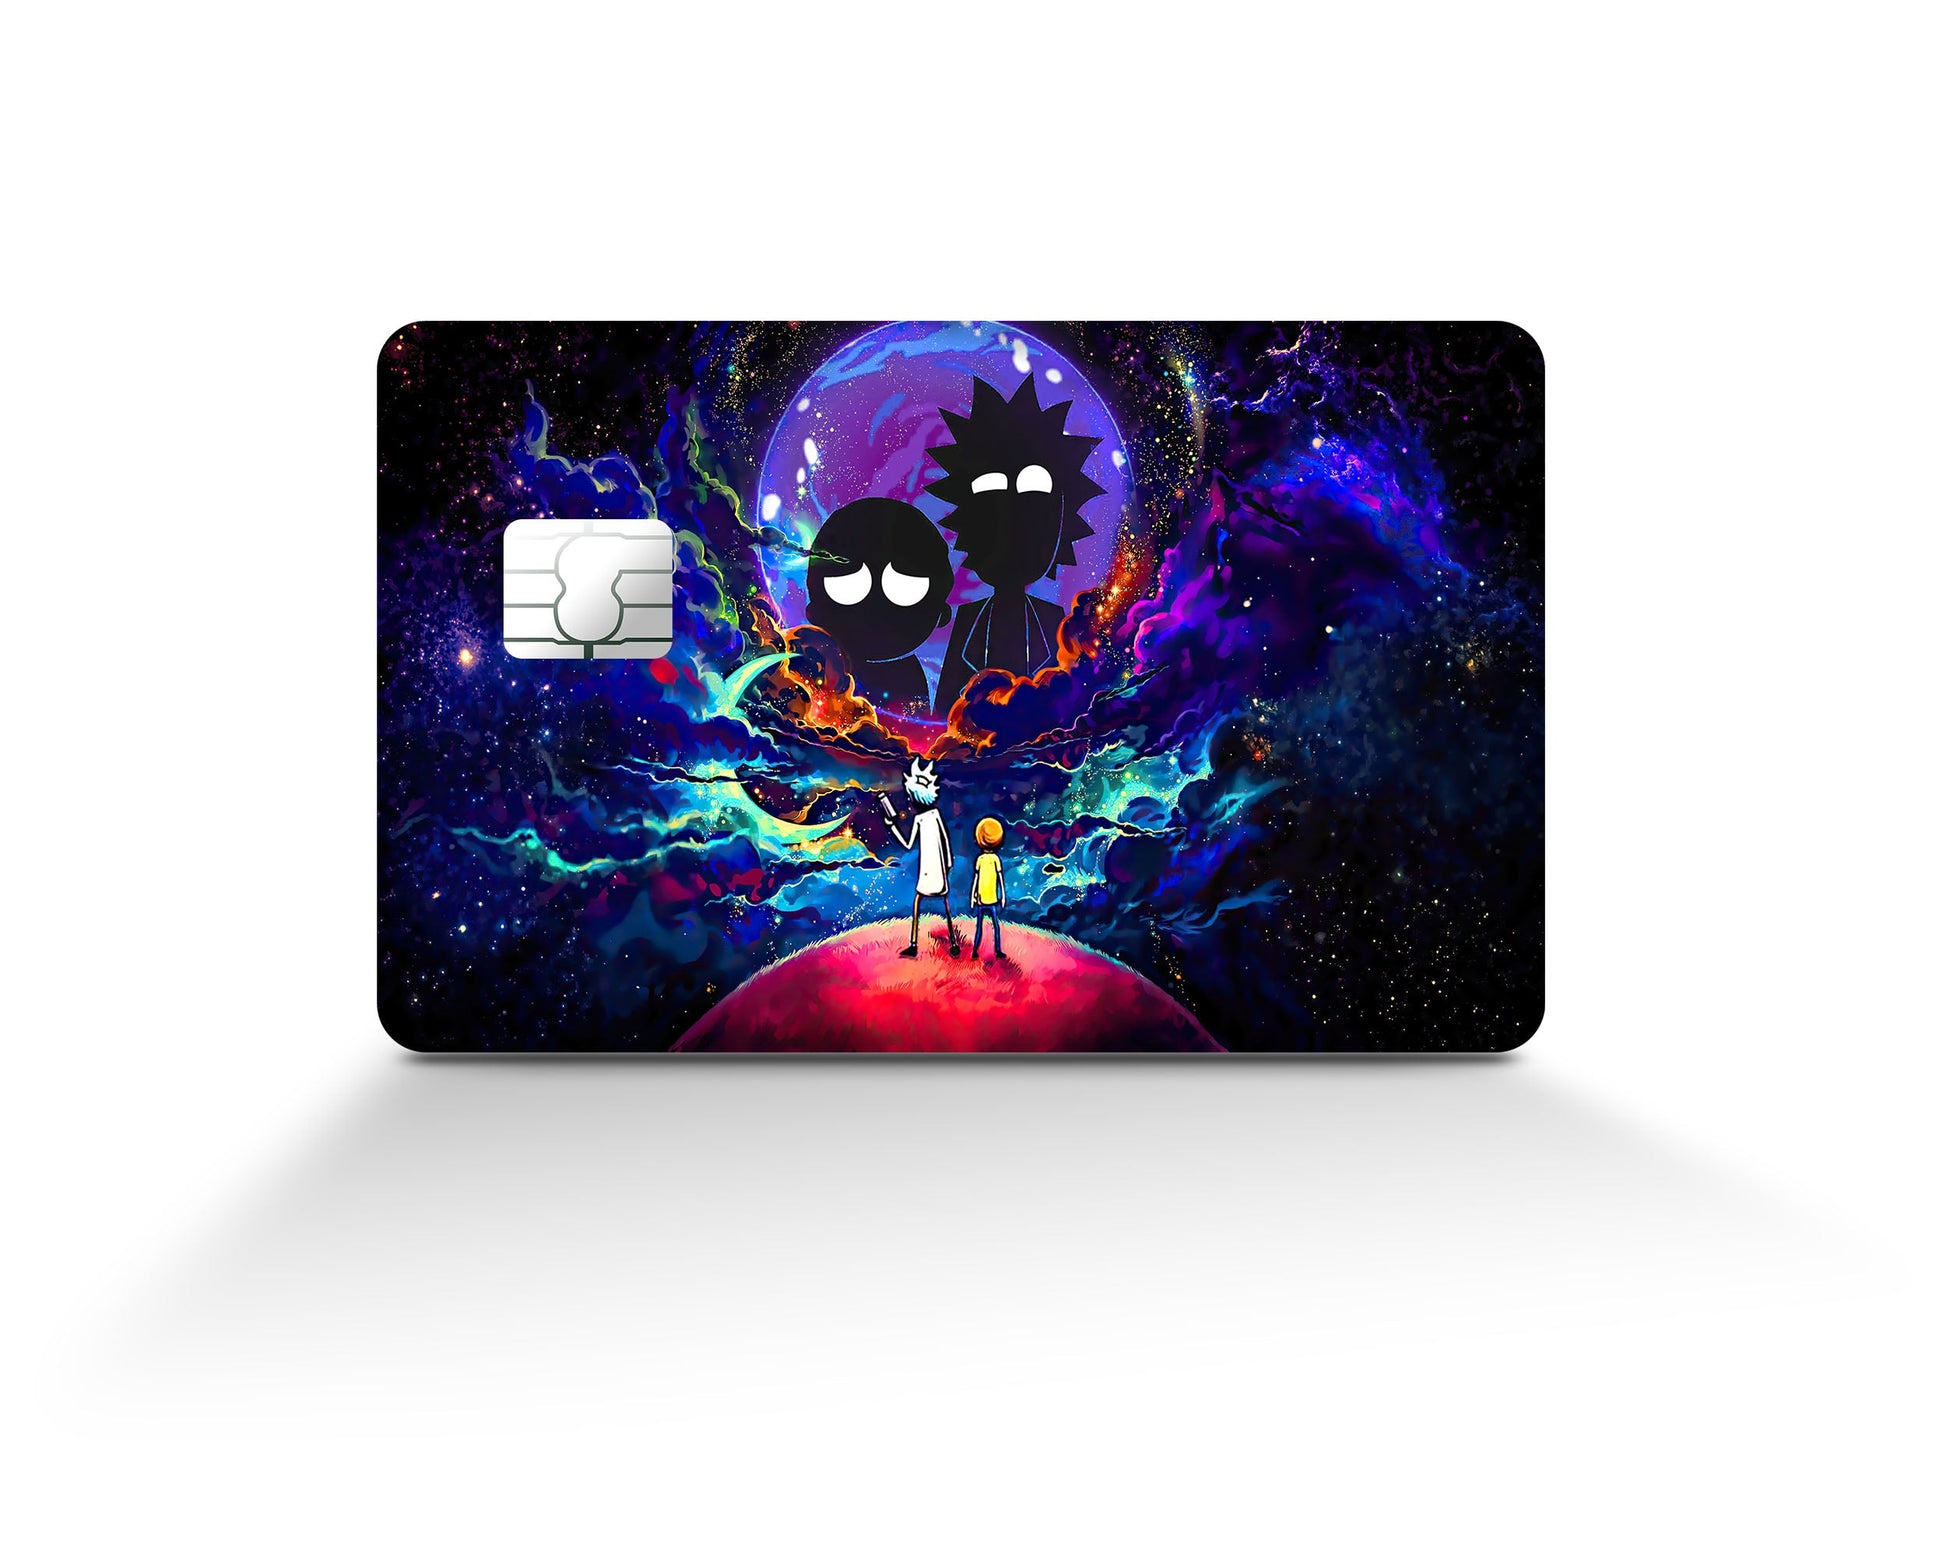 Anime Town Creations Credit Card Rick and Morty Space Exploration Full Skins - Anime Rick and Morty Credit Card Skin